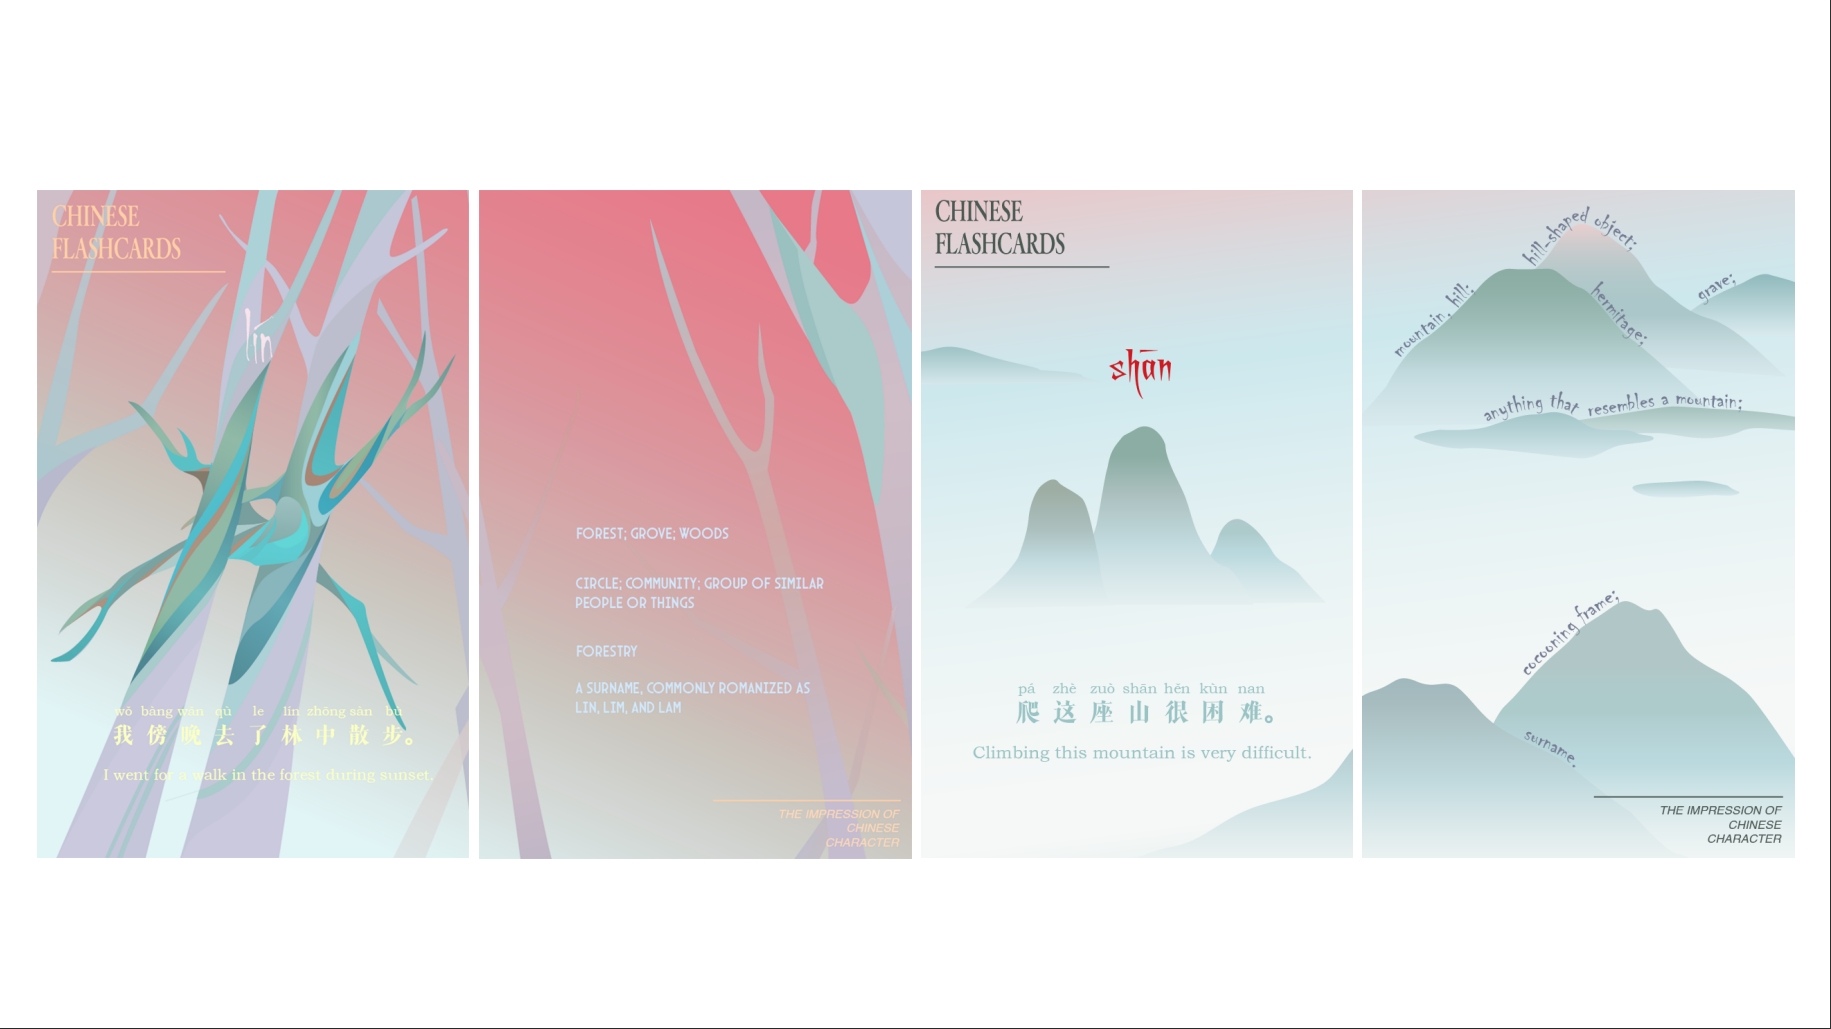 Chinese Flashcards with Chinese characters and English translation, includes illustrations of trees and mountains